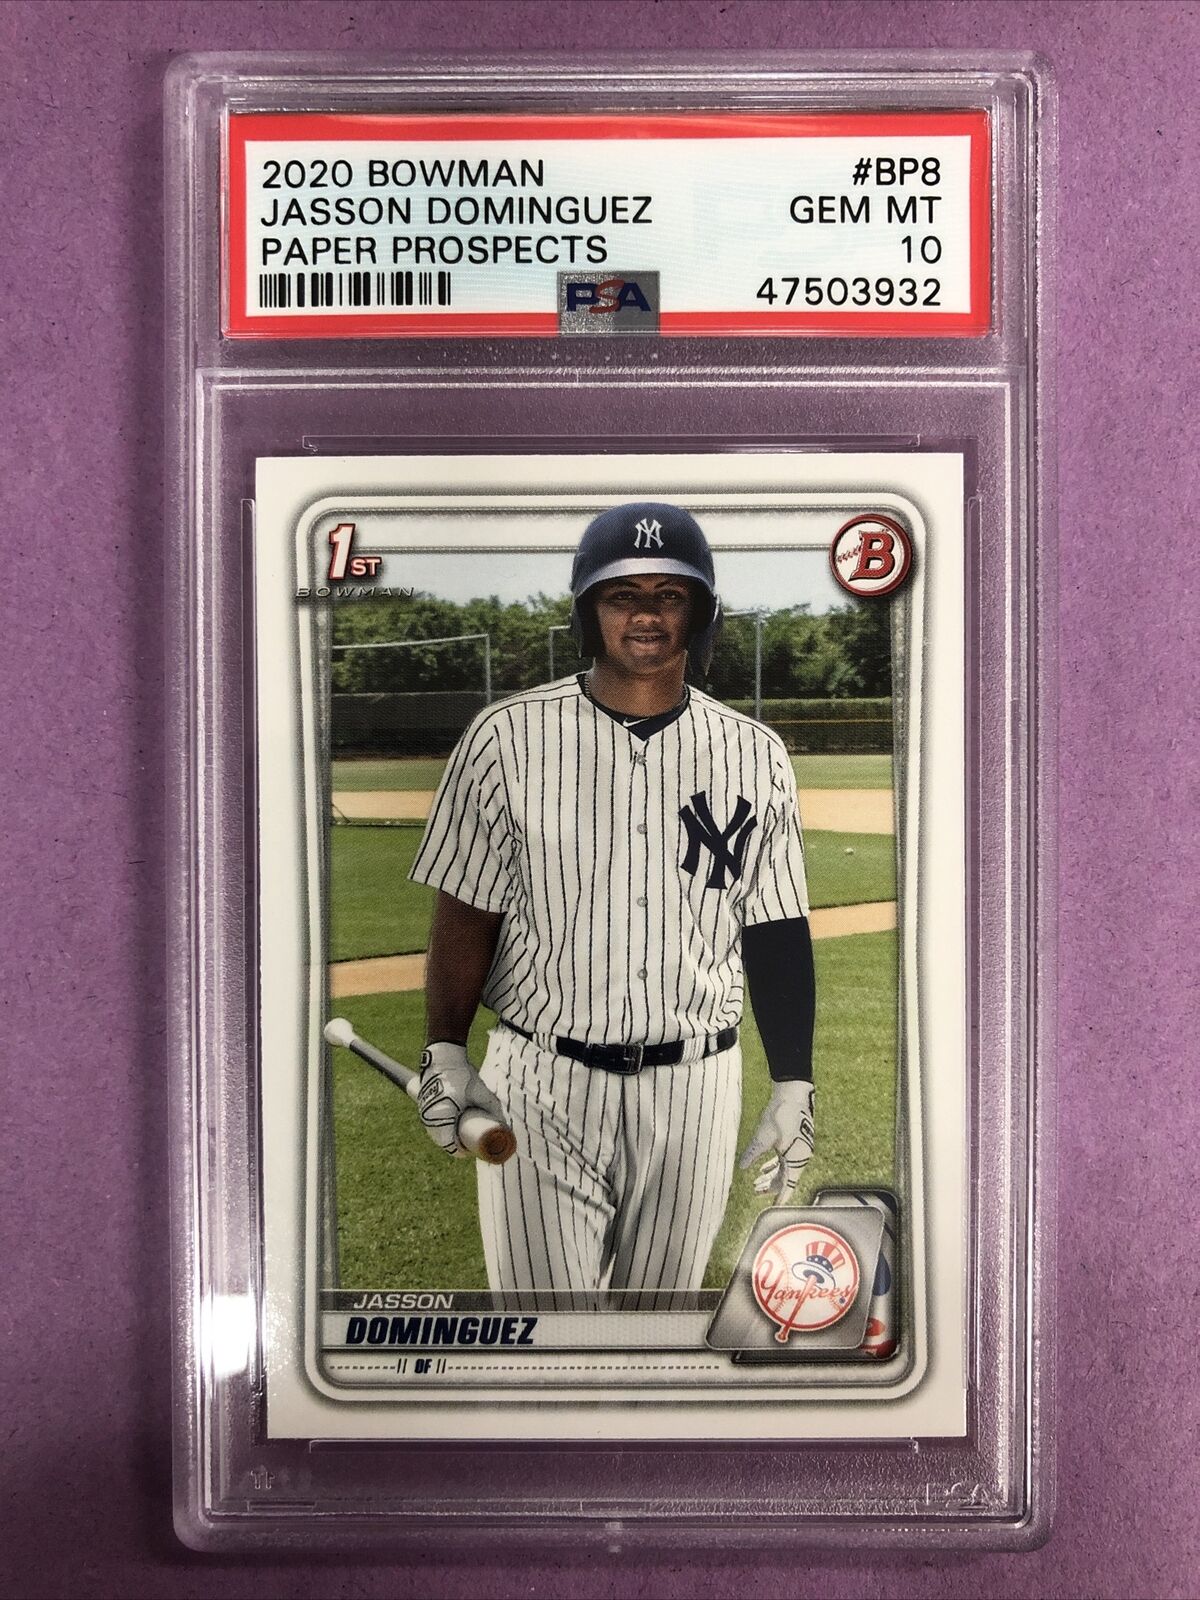 Top 5 2021 Baseball Card Investments To Make Some Extra Cash - Off The Bench